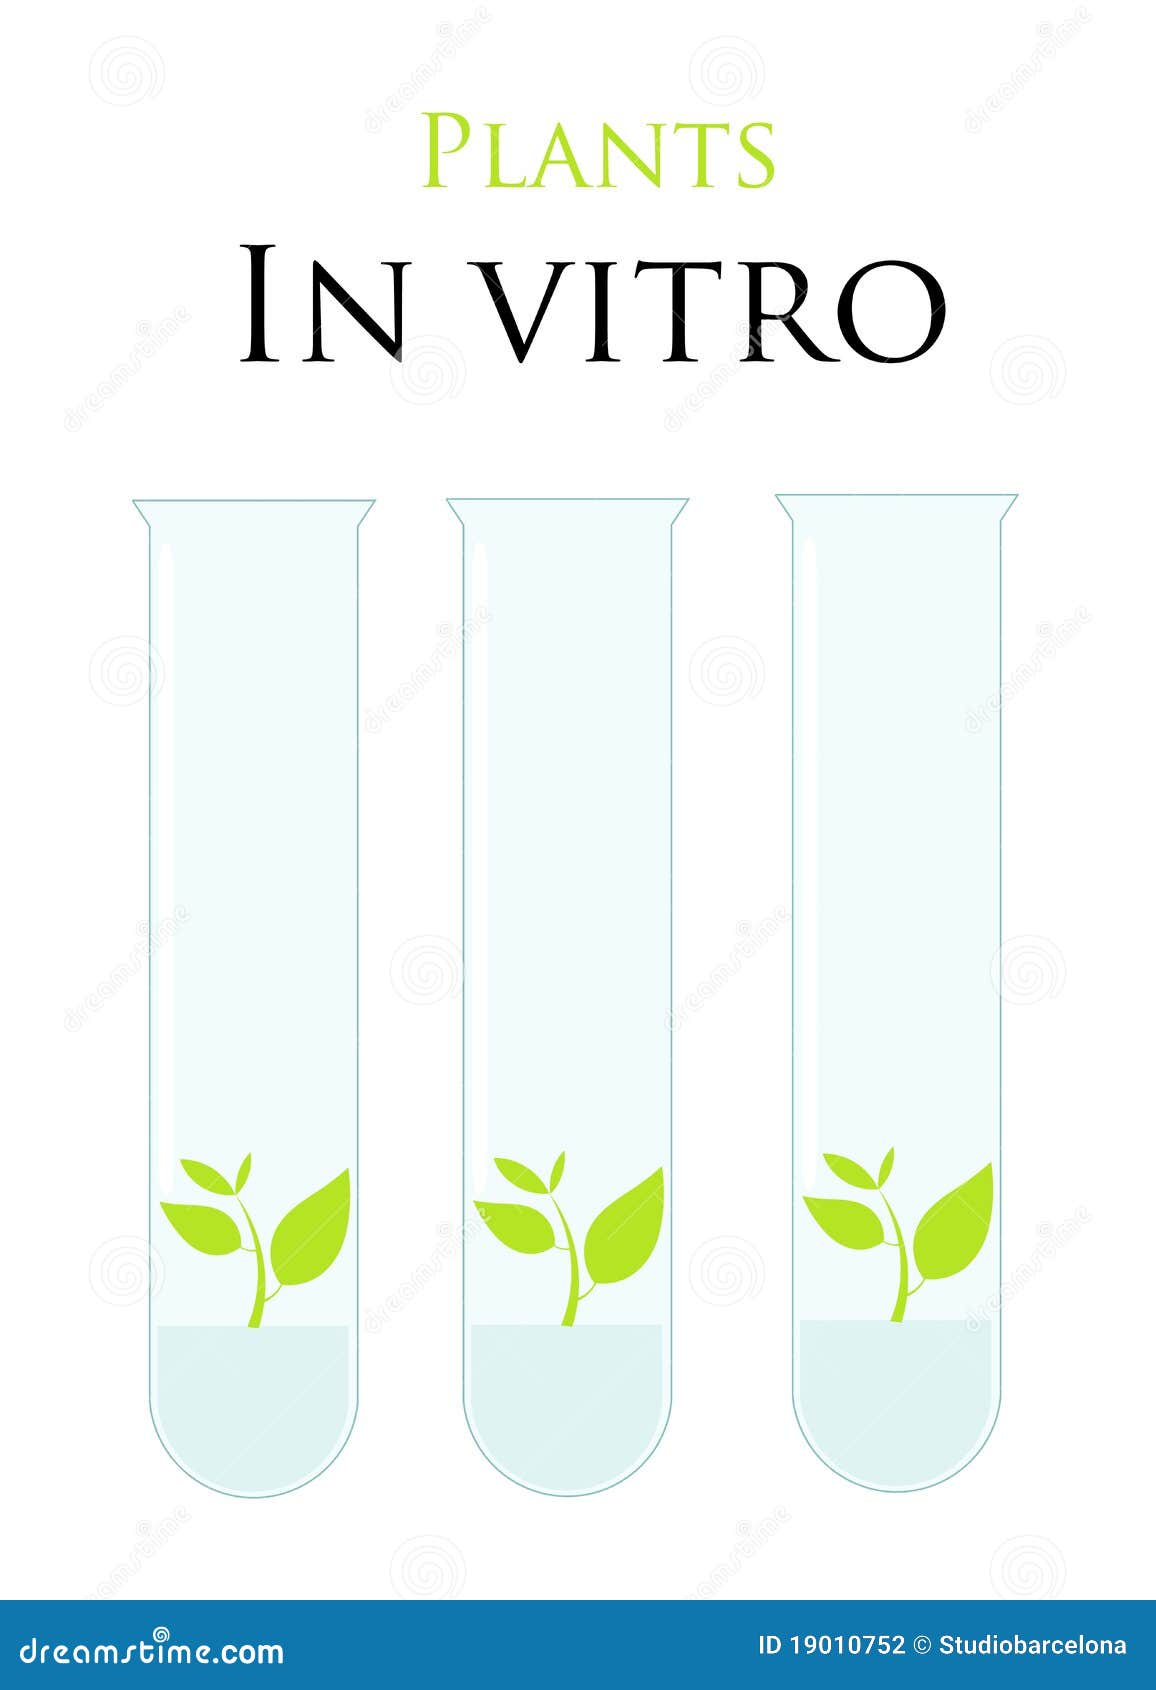 Diplomatic issues Reproduce dump Plants in test tubes stock vector. Illustration of biotechnology - 19010752